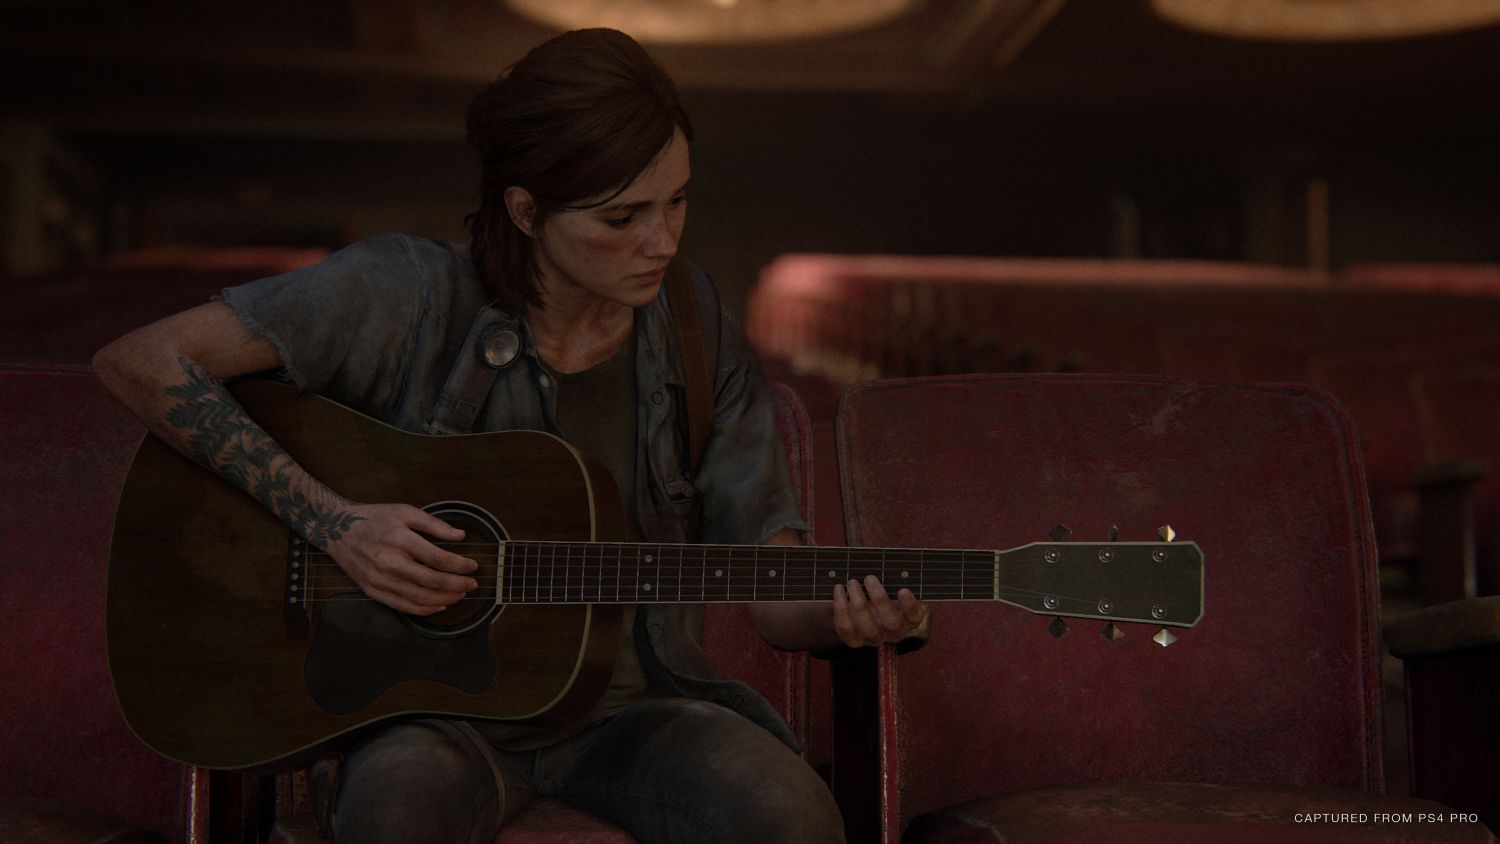 The Last of Us Review Bombing Makes Metacritic Revamp User Reviews